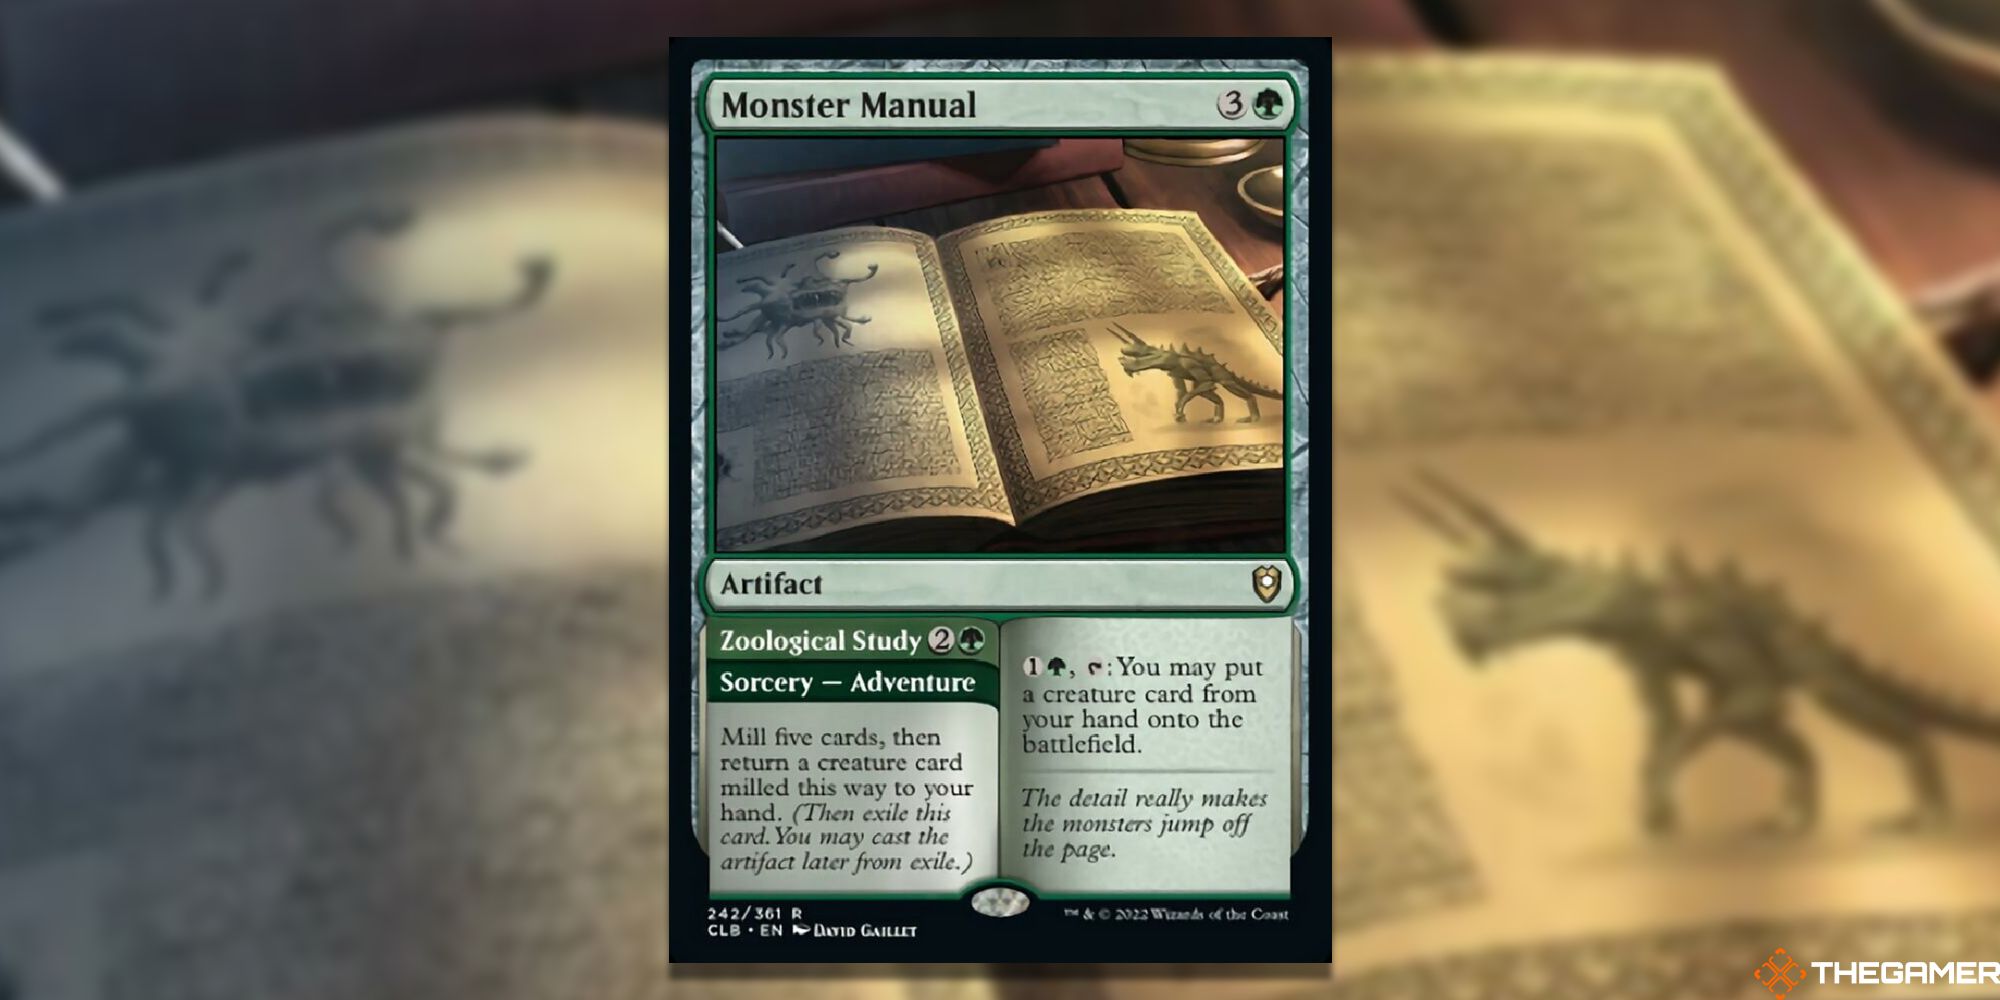 Magic: The Gathering Monster Manual full card with background